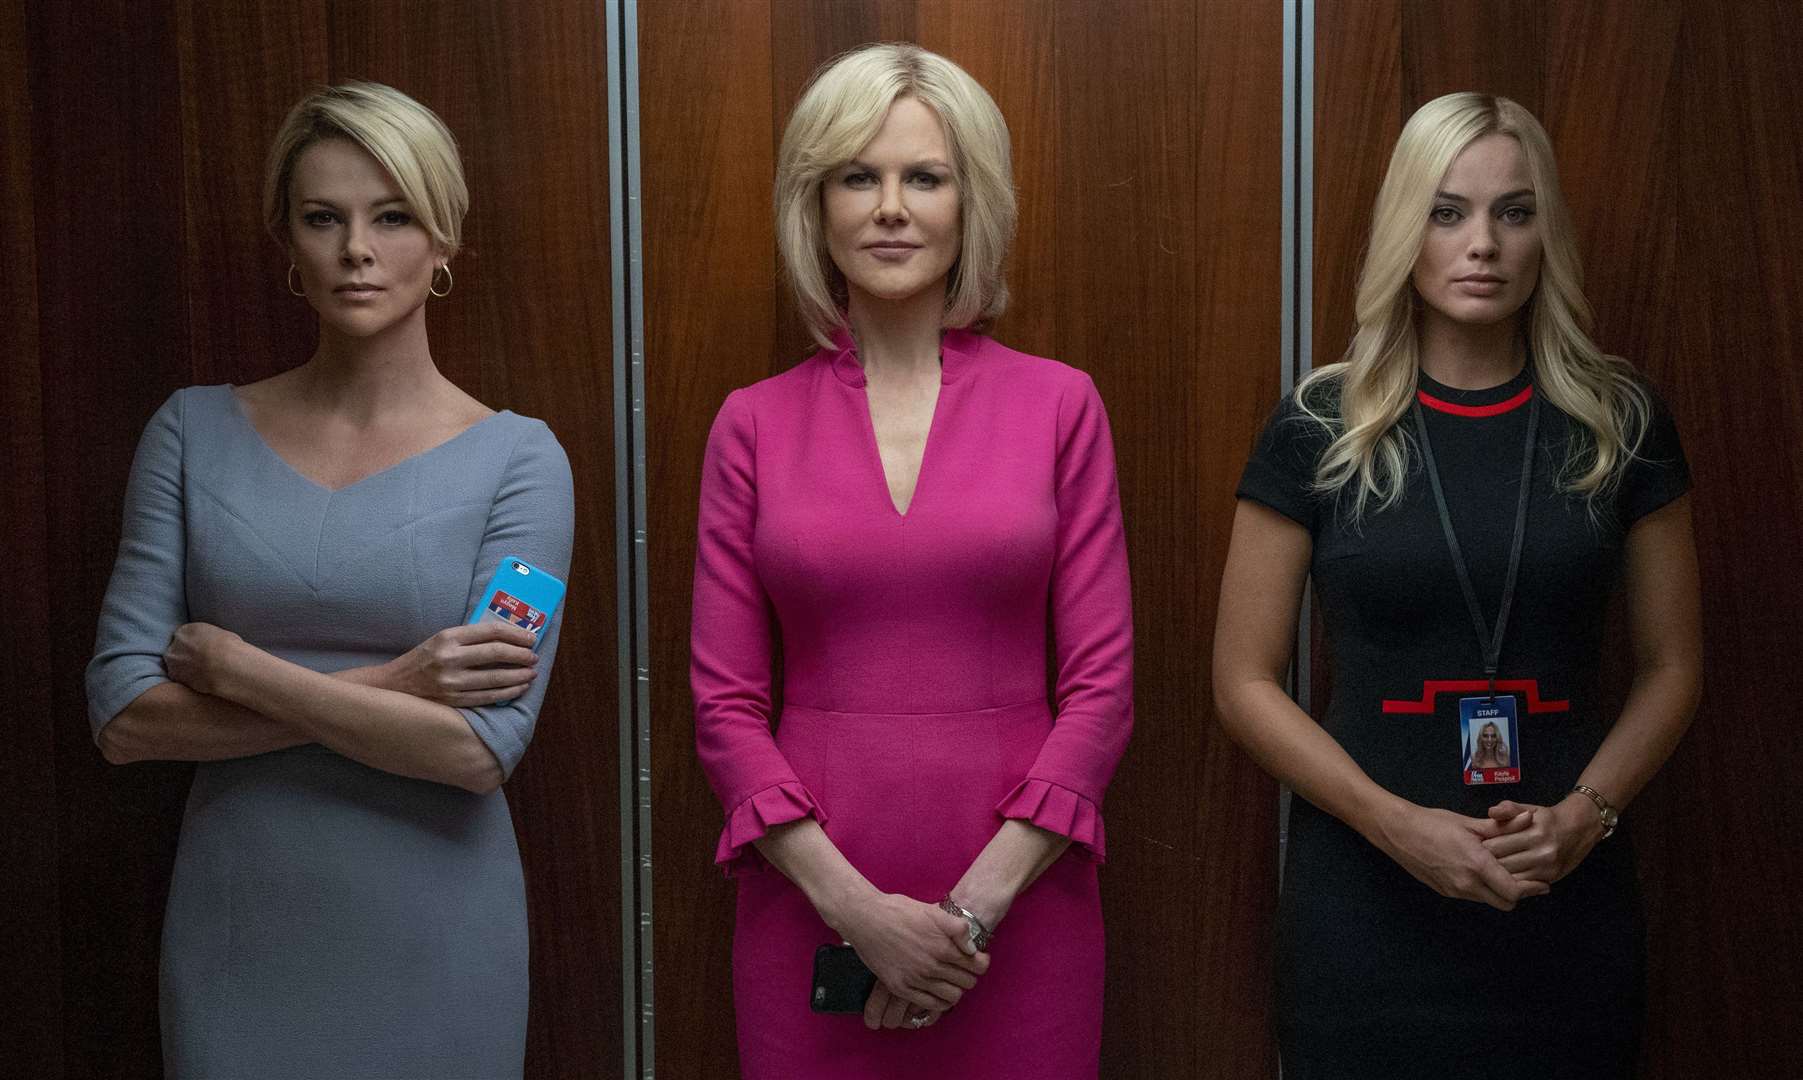 Bombshell. Pictured: Charlize Theron as Megyn Kelly, Nicole Kidman as Gretchen Carlson and Margot Robbie as Kayla Pospisil Picture: PA Photo/Lionsgate Films/Hilary B Gayle/SMPSP